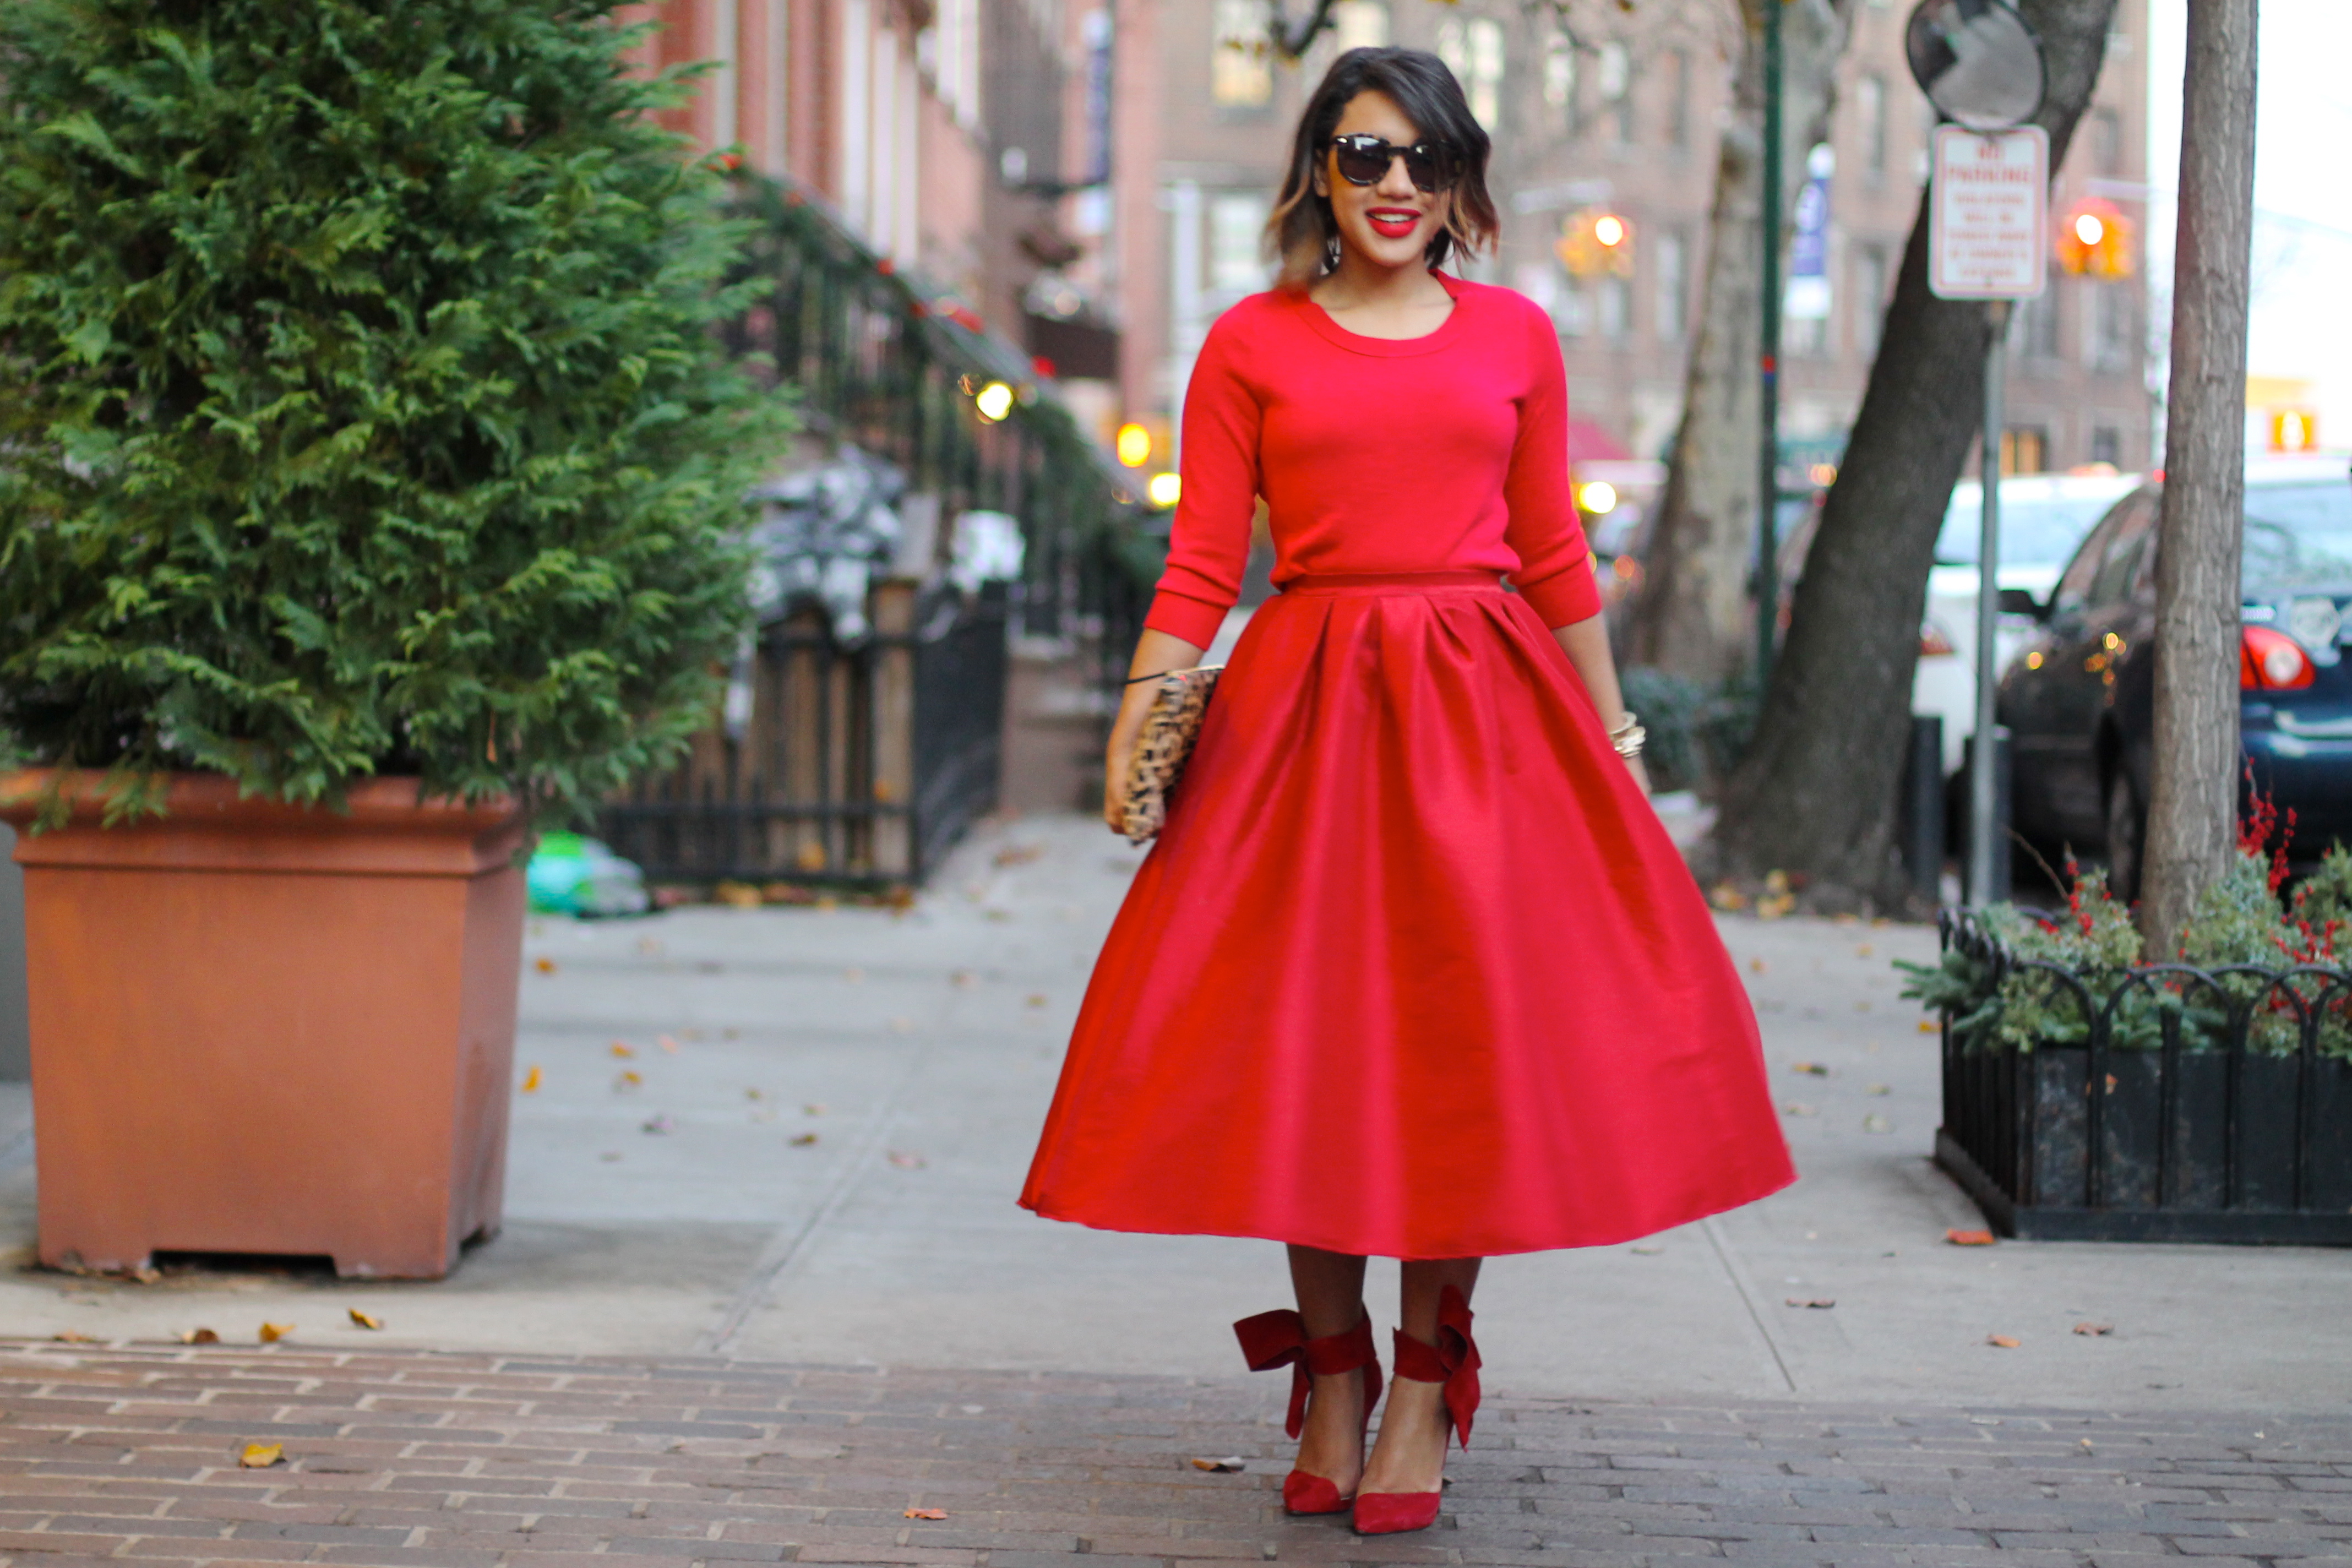 red dress red shoes red skirt red outfit holiday outfit red midi skirt full red midi skirt red midi skirt full midi skirt midi skirt red blogger look all red blogger look red look red outfit red style all red blogger look black fashion blogger black fashion blogger fashion blogger red bow shoes big red bow holiday look what to wear to a holiday party holiday party style holiday style 